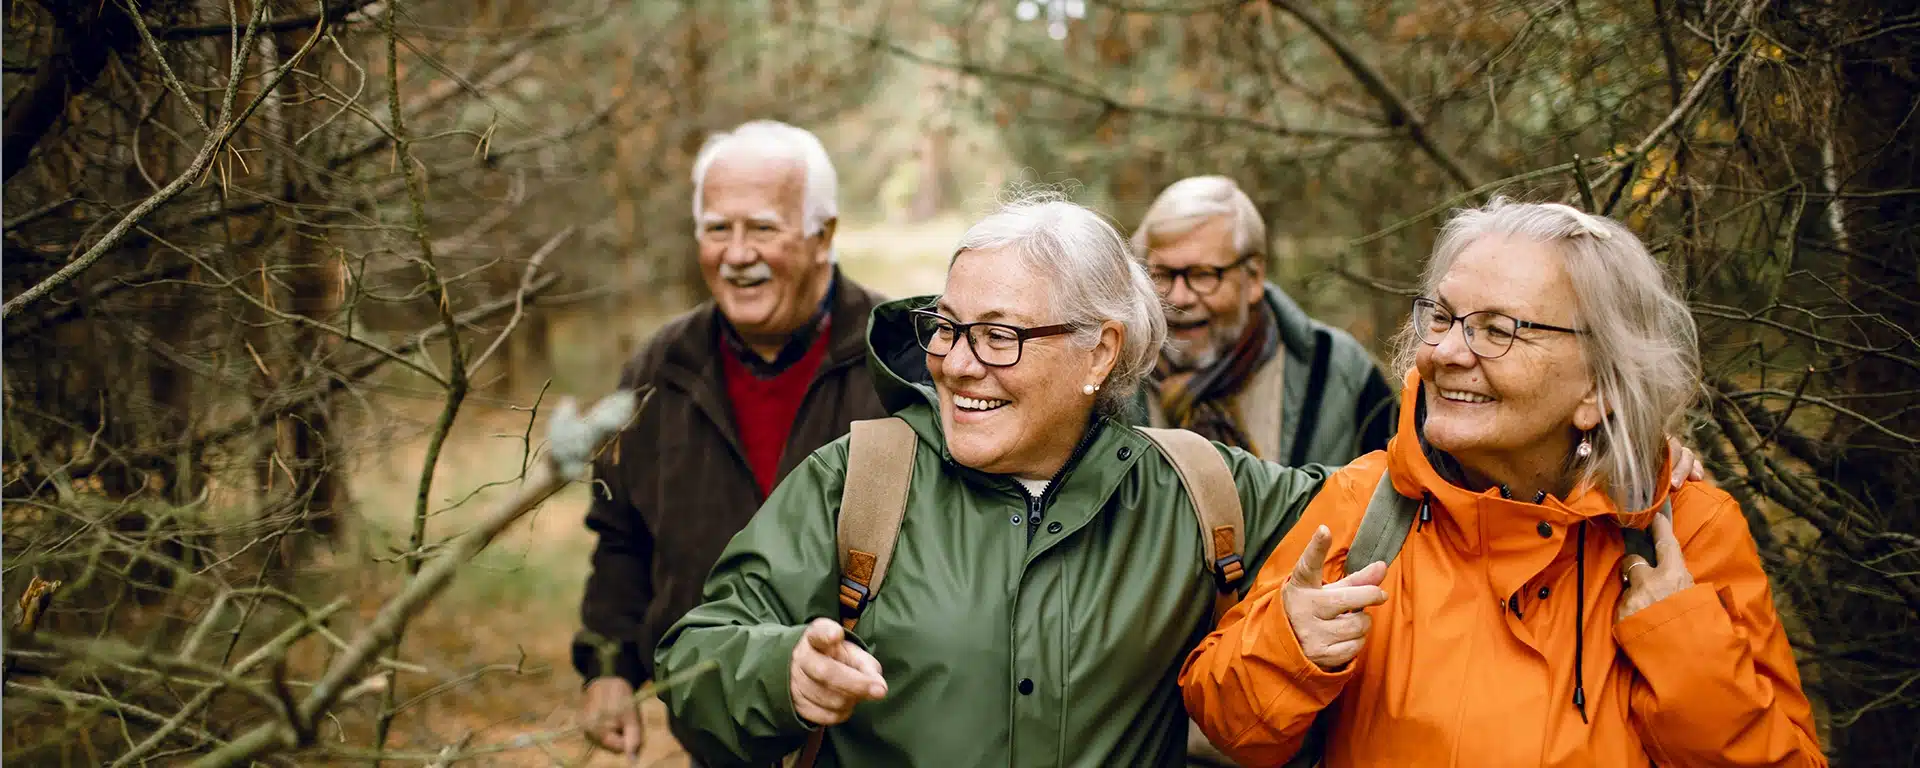 A group of older adults walking in the woods together on a autumn day.